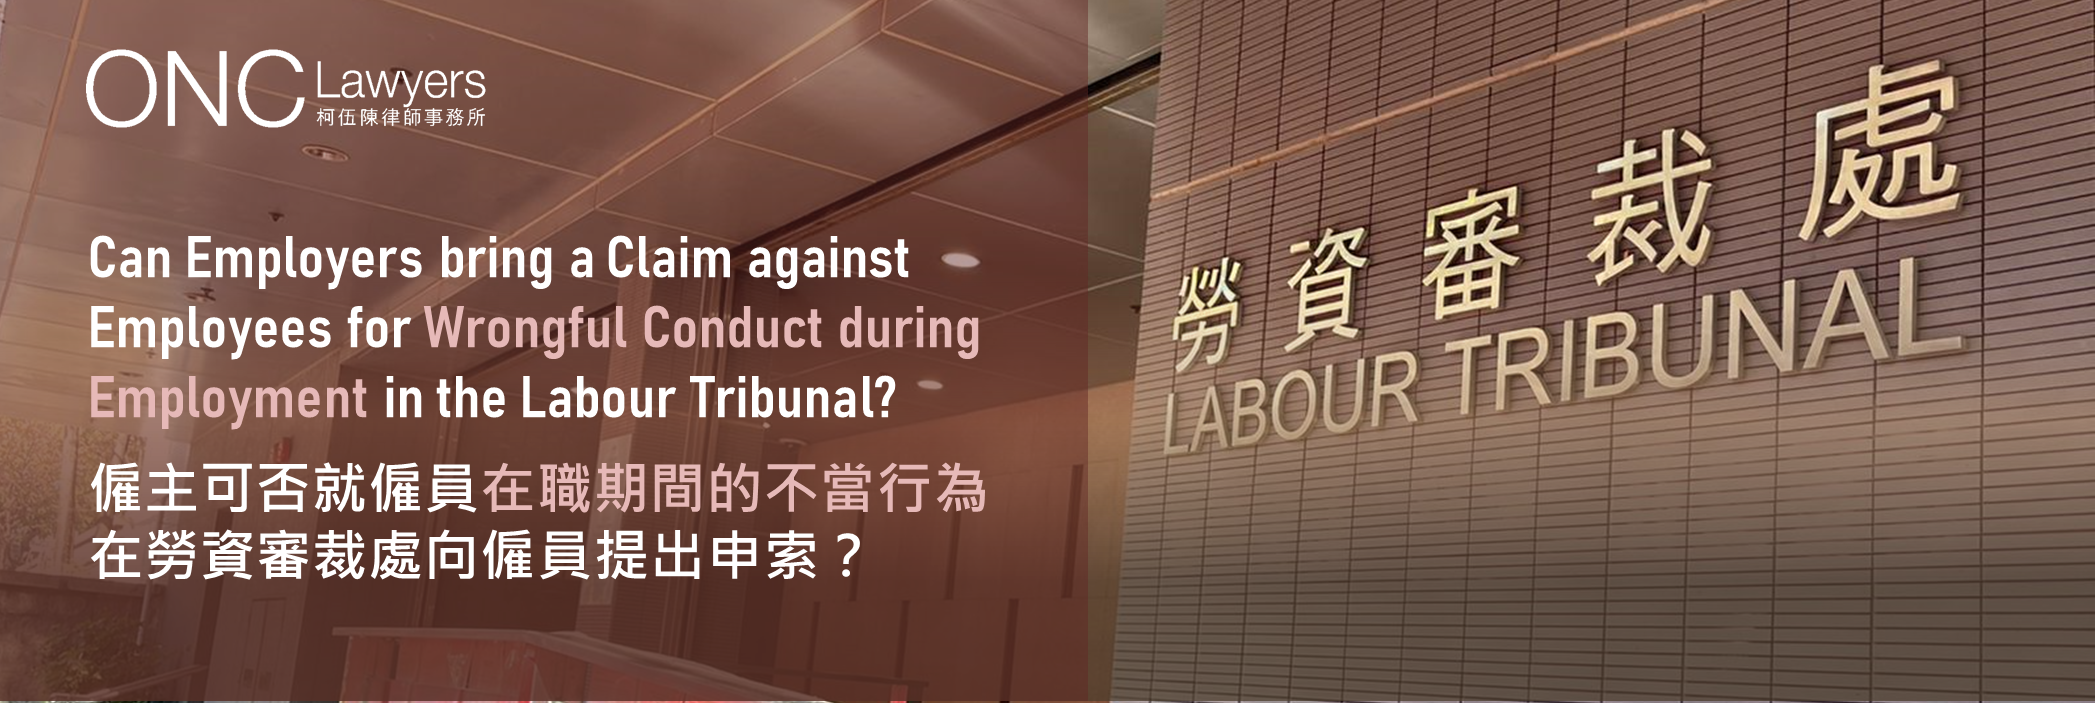 Can employers bring a claim against employees for wrongful conduct during employment in the Labour Tribunal? 僱主可否就僱員在職期間的不當行為在勞資審裁處向僱員提出申索？